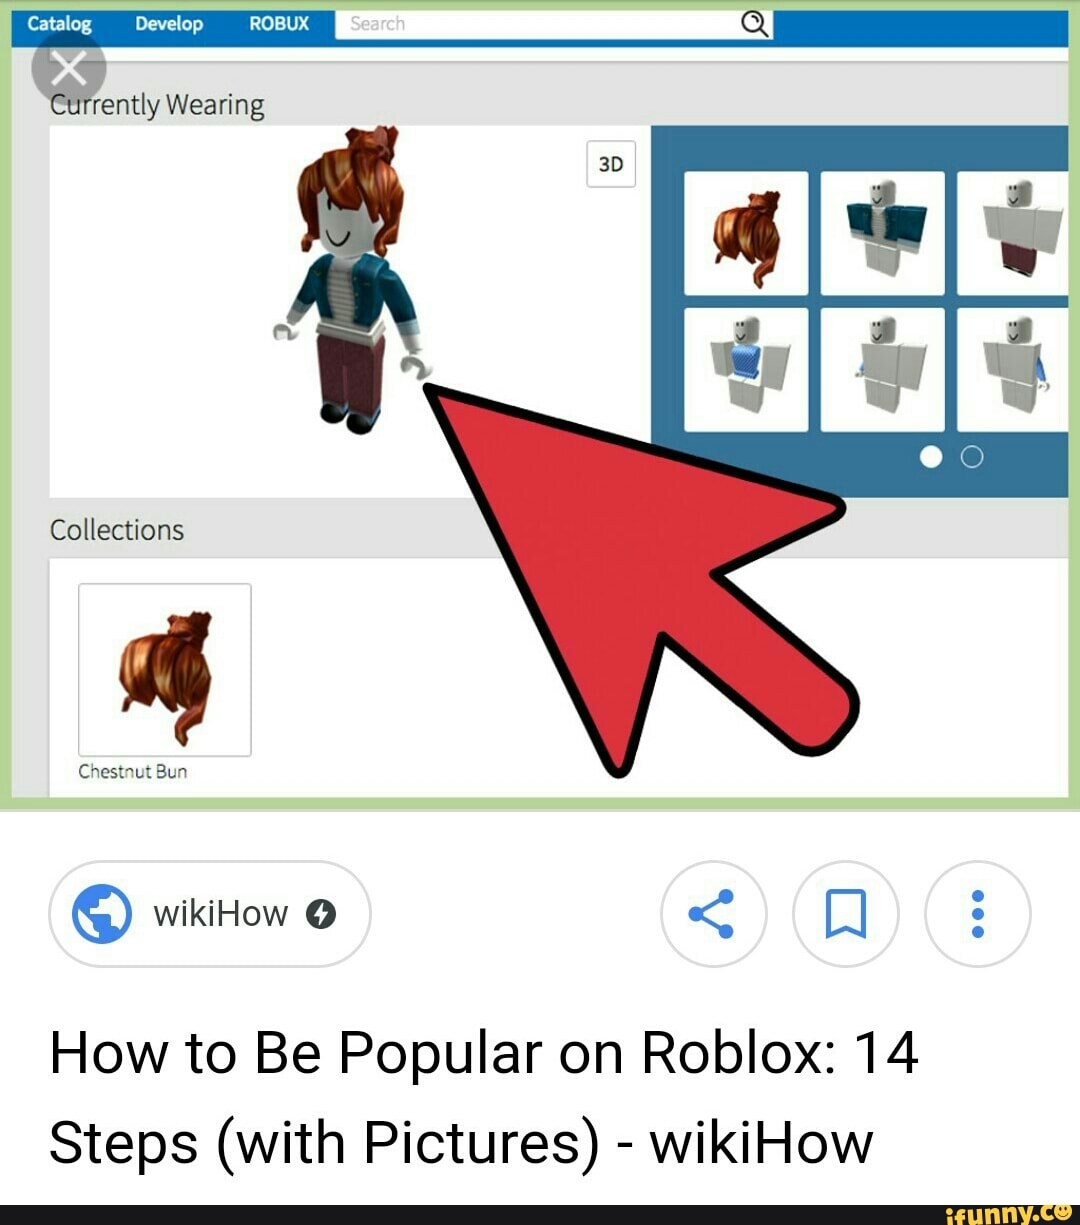 How To Be Popular On Roblox 14 Steps With Pictures Wikihow Ifunny - chestnut bun roblox